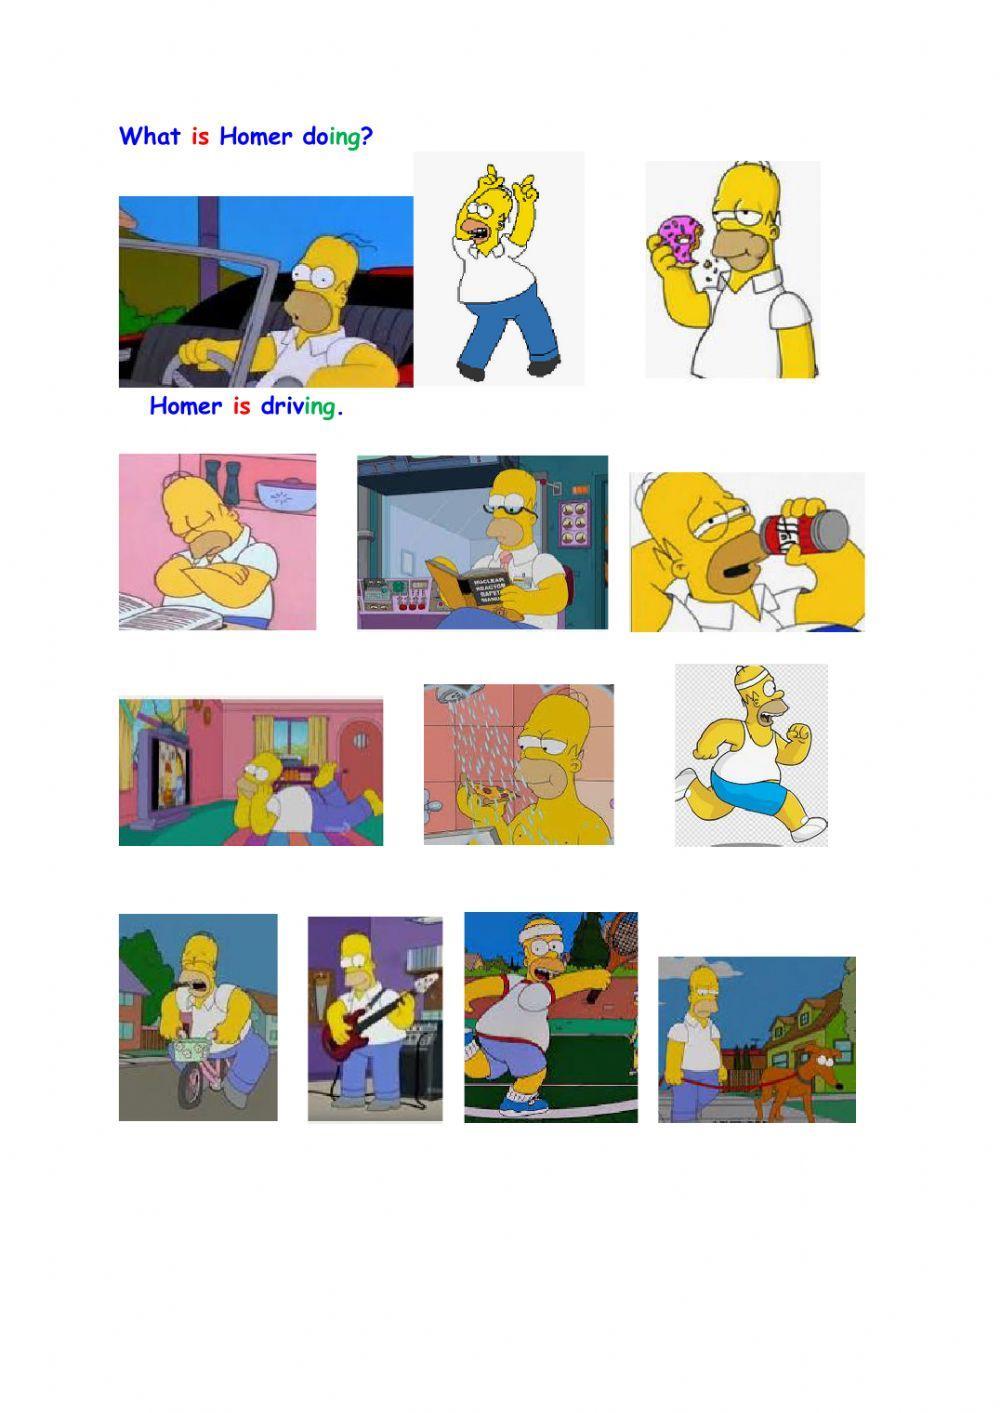 What is Homer doing?